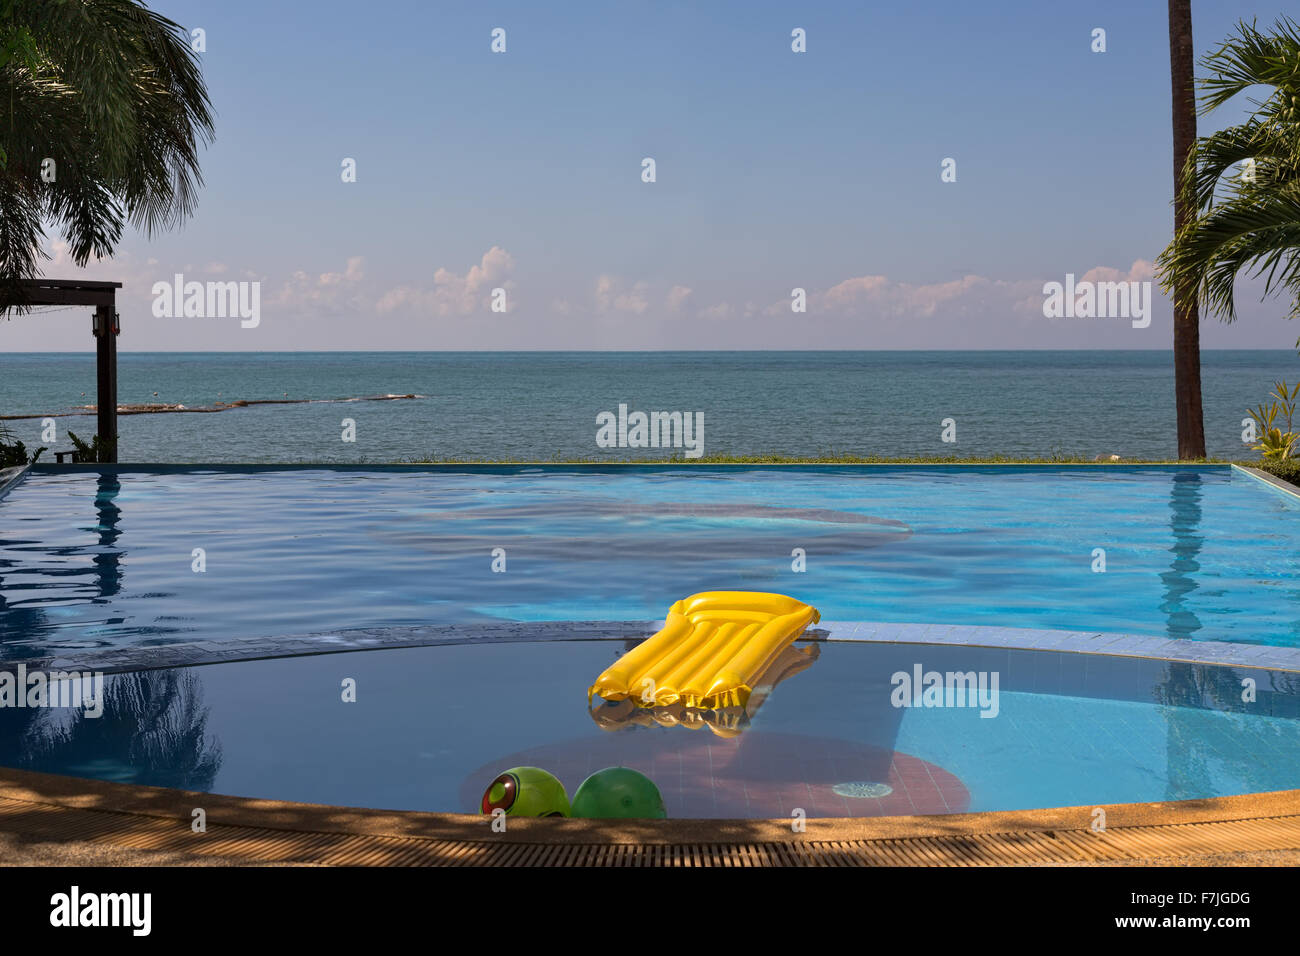 Pool overlooking the sea with yellow inflatable mattress. Stock Photo